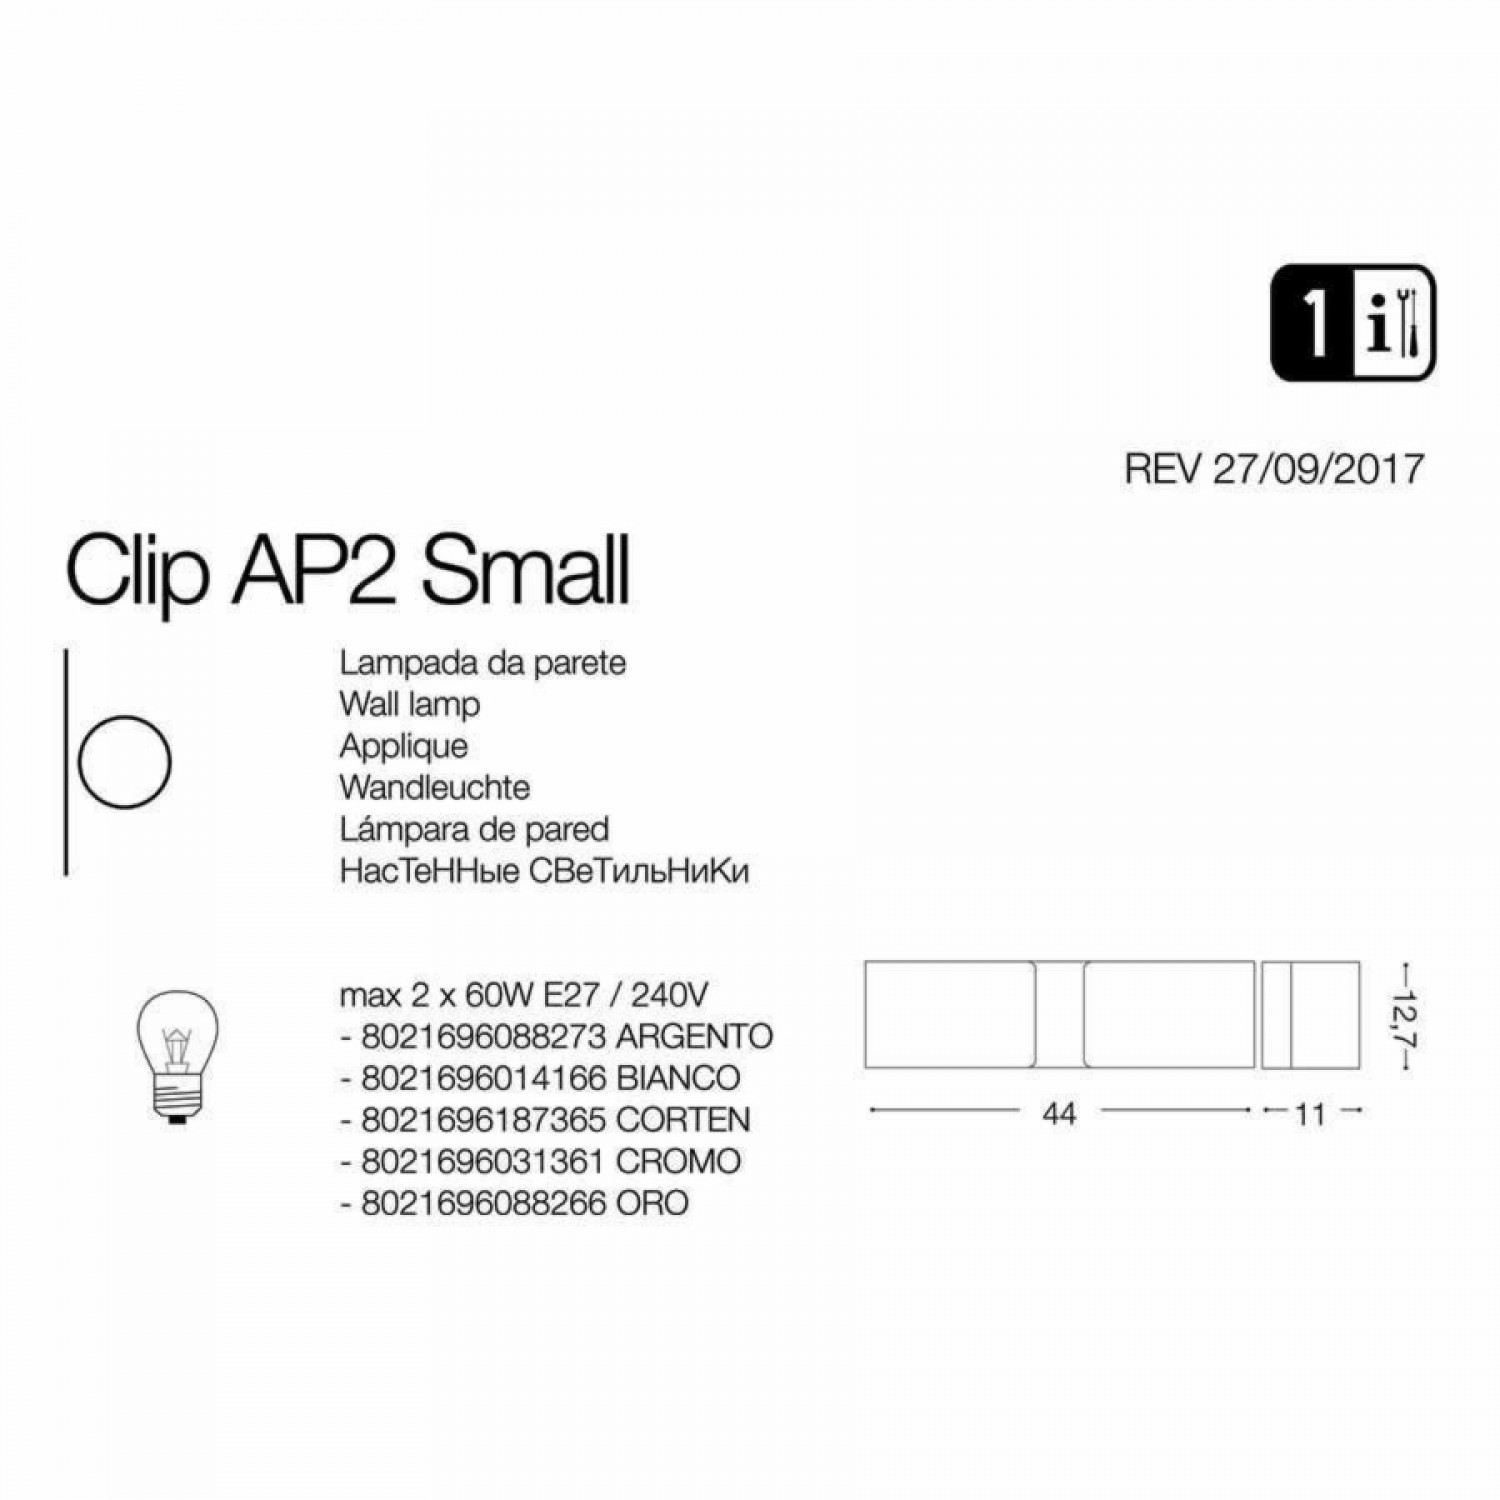 Бра Ideal Lux CLIP AP2 SMALL ARGENTO 088273